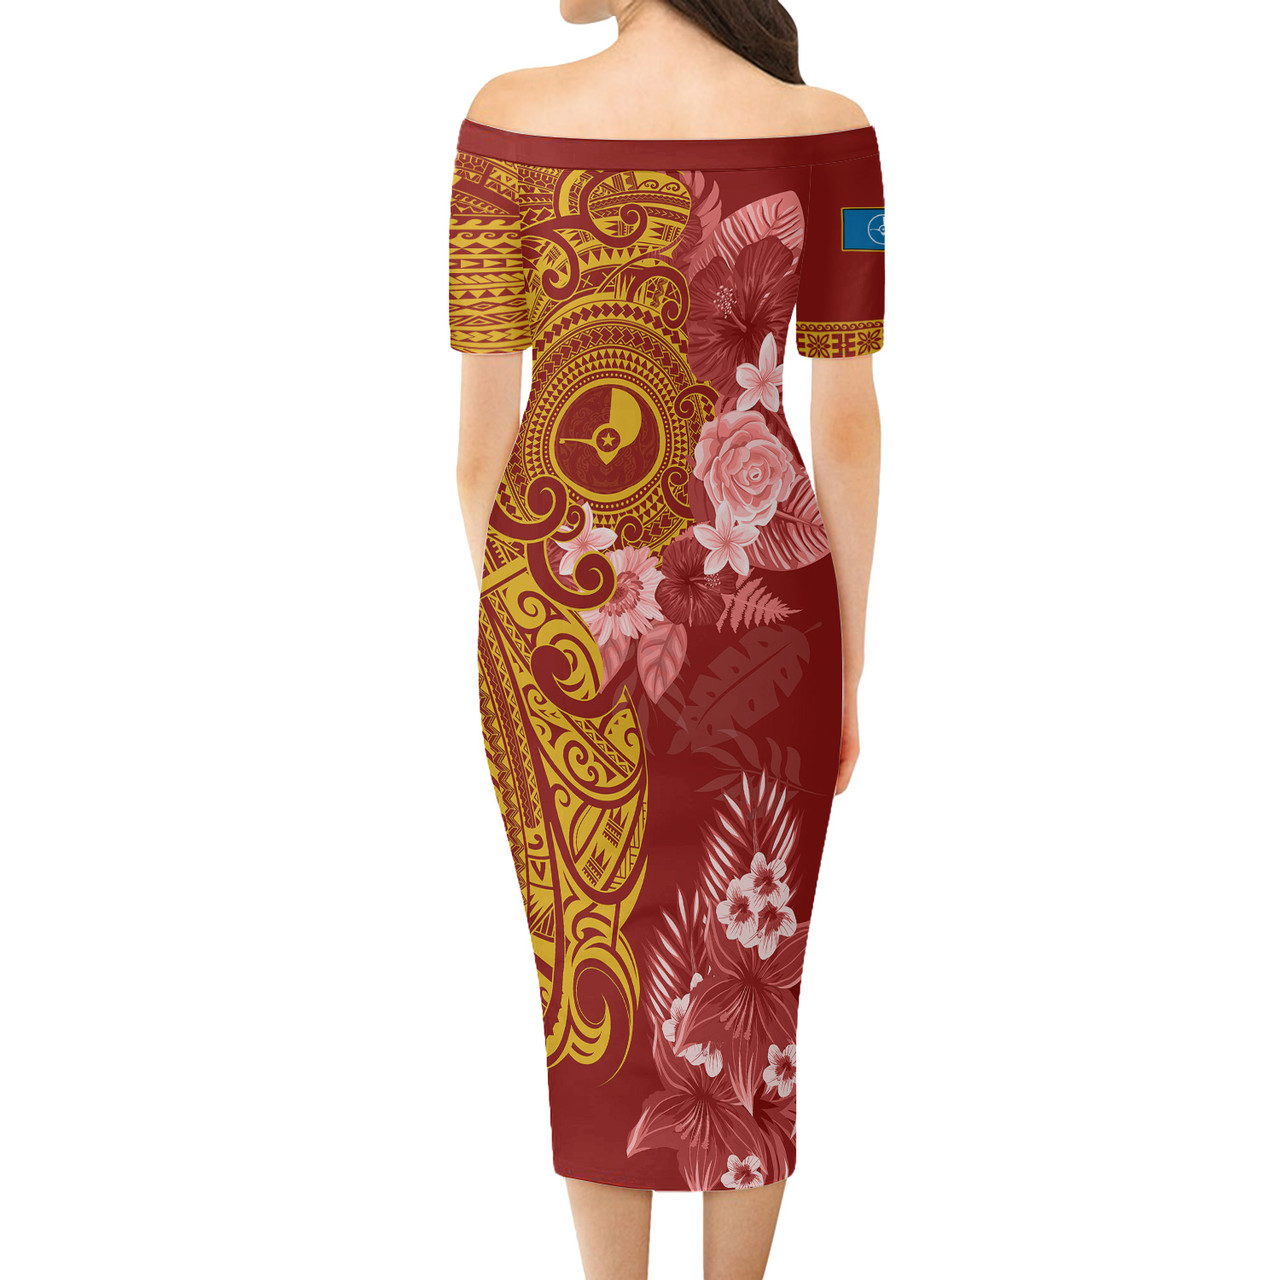 Yap State Short Sleeve Off The Shoulder Lady Dress Polynesian Tropical Plumeria Tribal Red